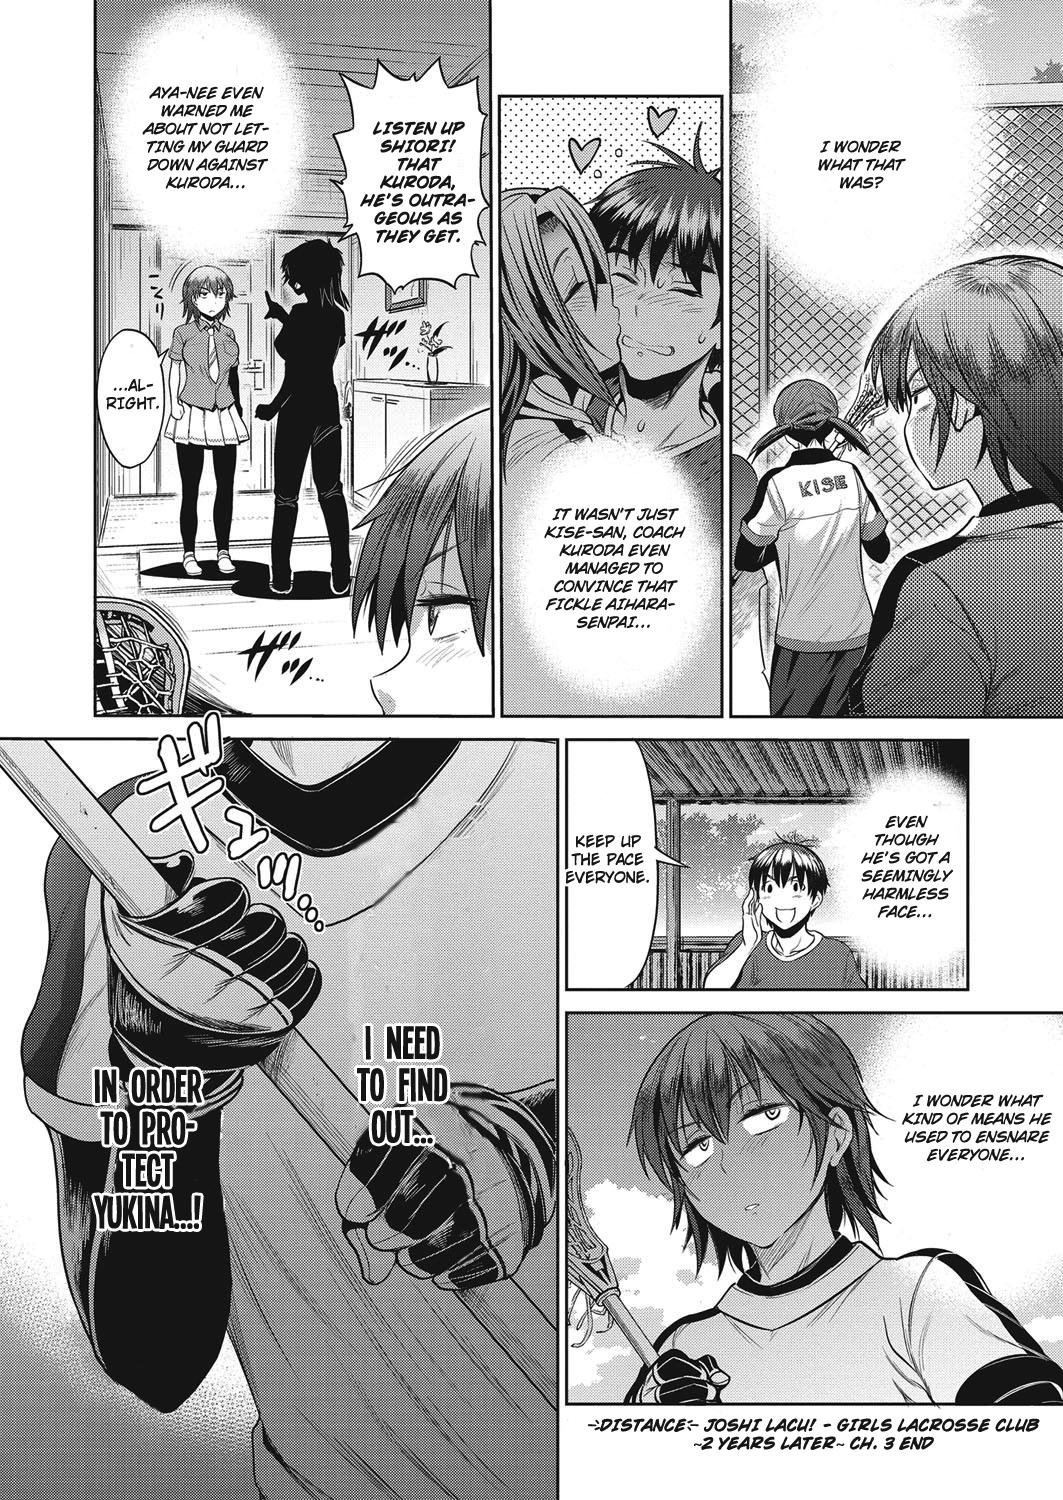 [DISTANCE] Joshi Lacu! - Girls Lacrosse Club ~2 Years Later~ Ch. 3 (COMIC ExE 04) [English] [TripleSevenScans] [Digital] 39